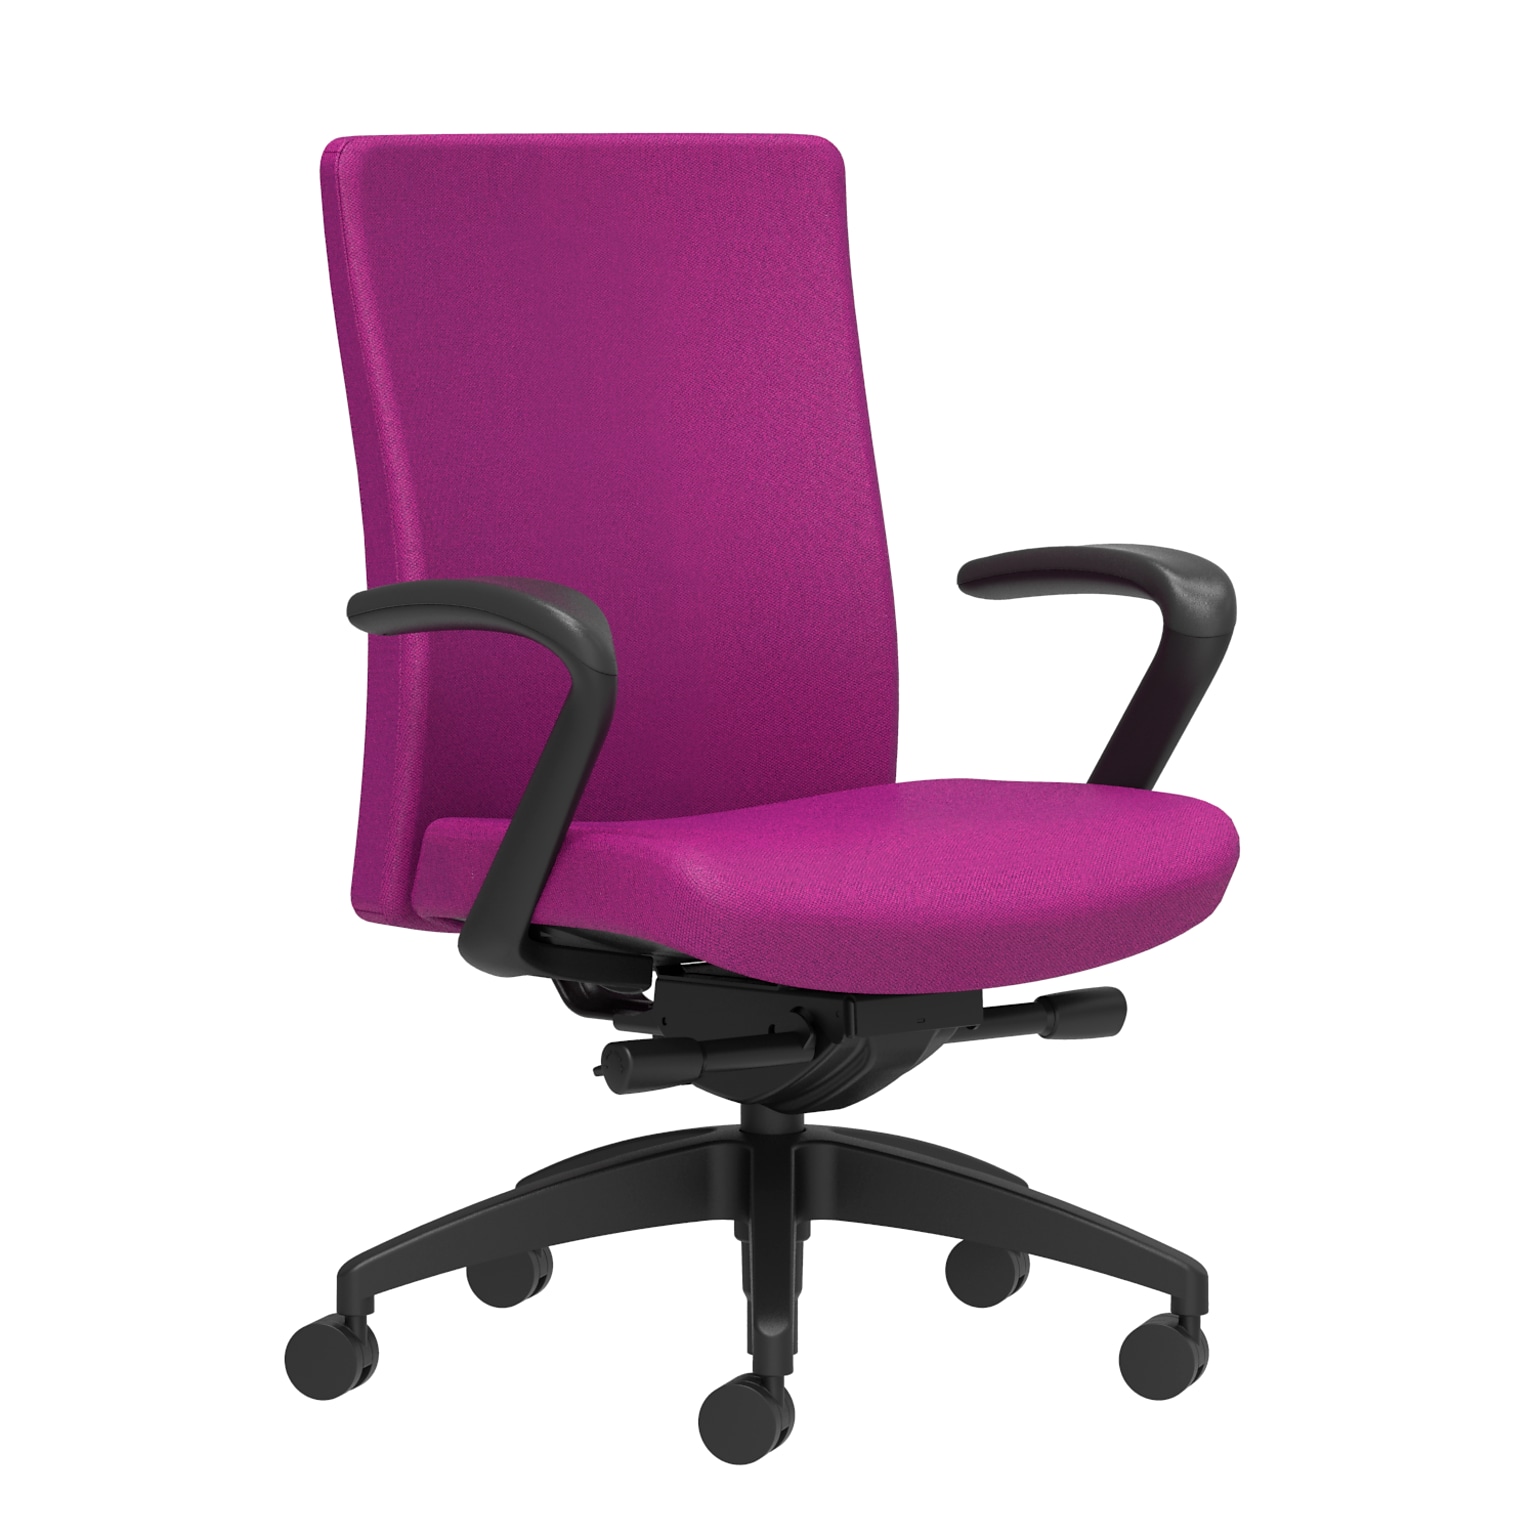 Union & Scale Workplace2.0™ Task Chair Upholstered, Fixed Arms, Amethyst Fabric, Synchro Tilt Seat Slide (54181)